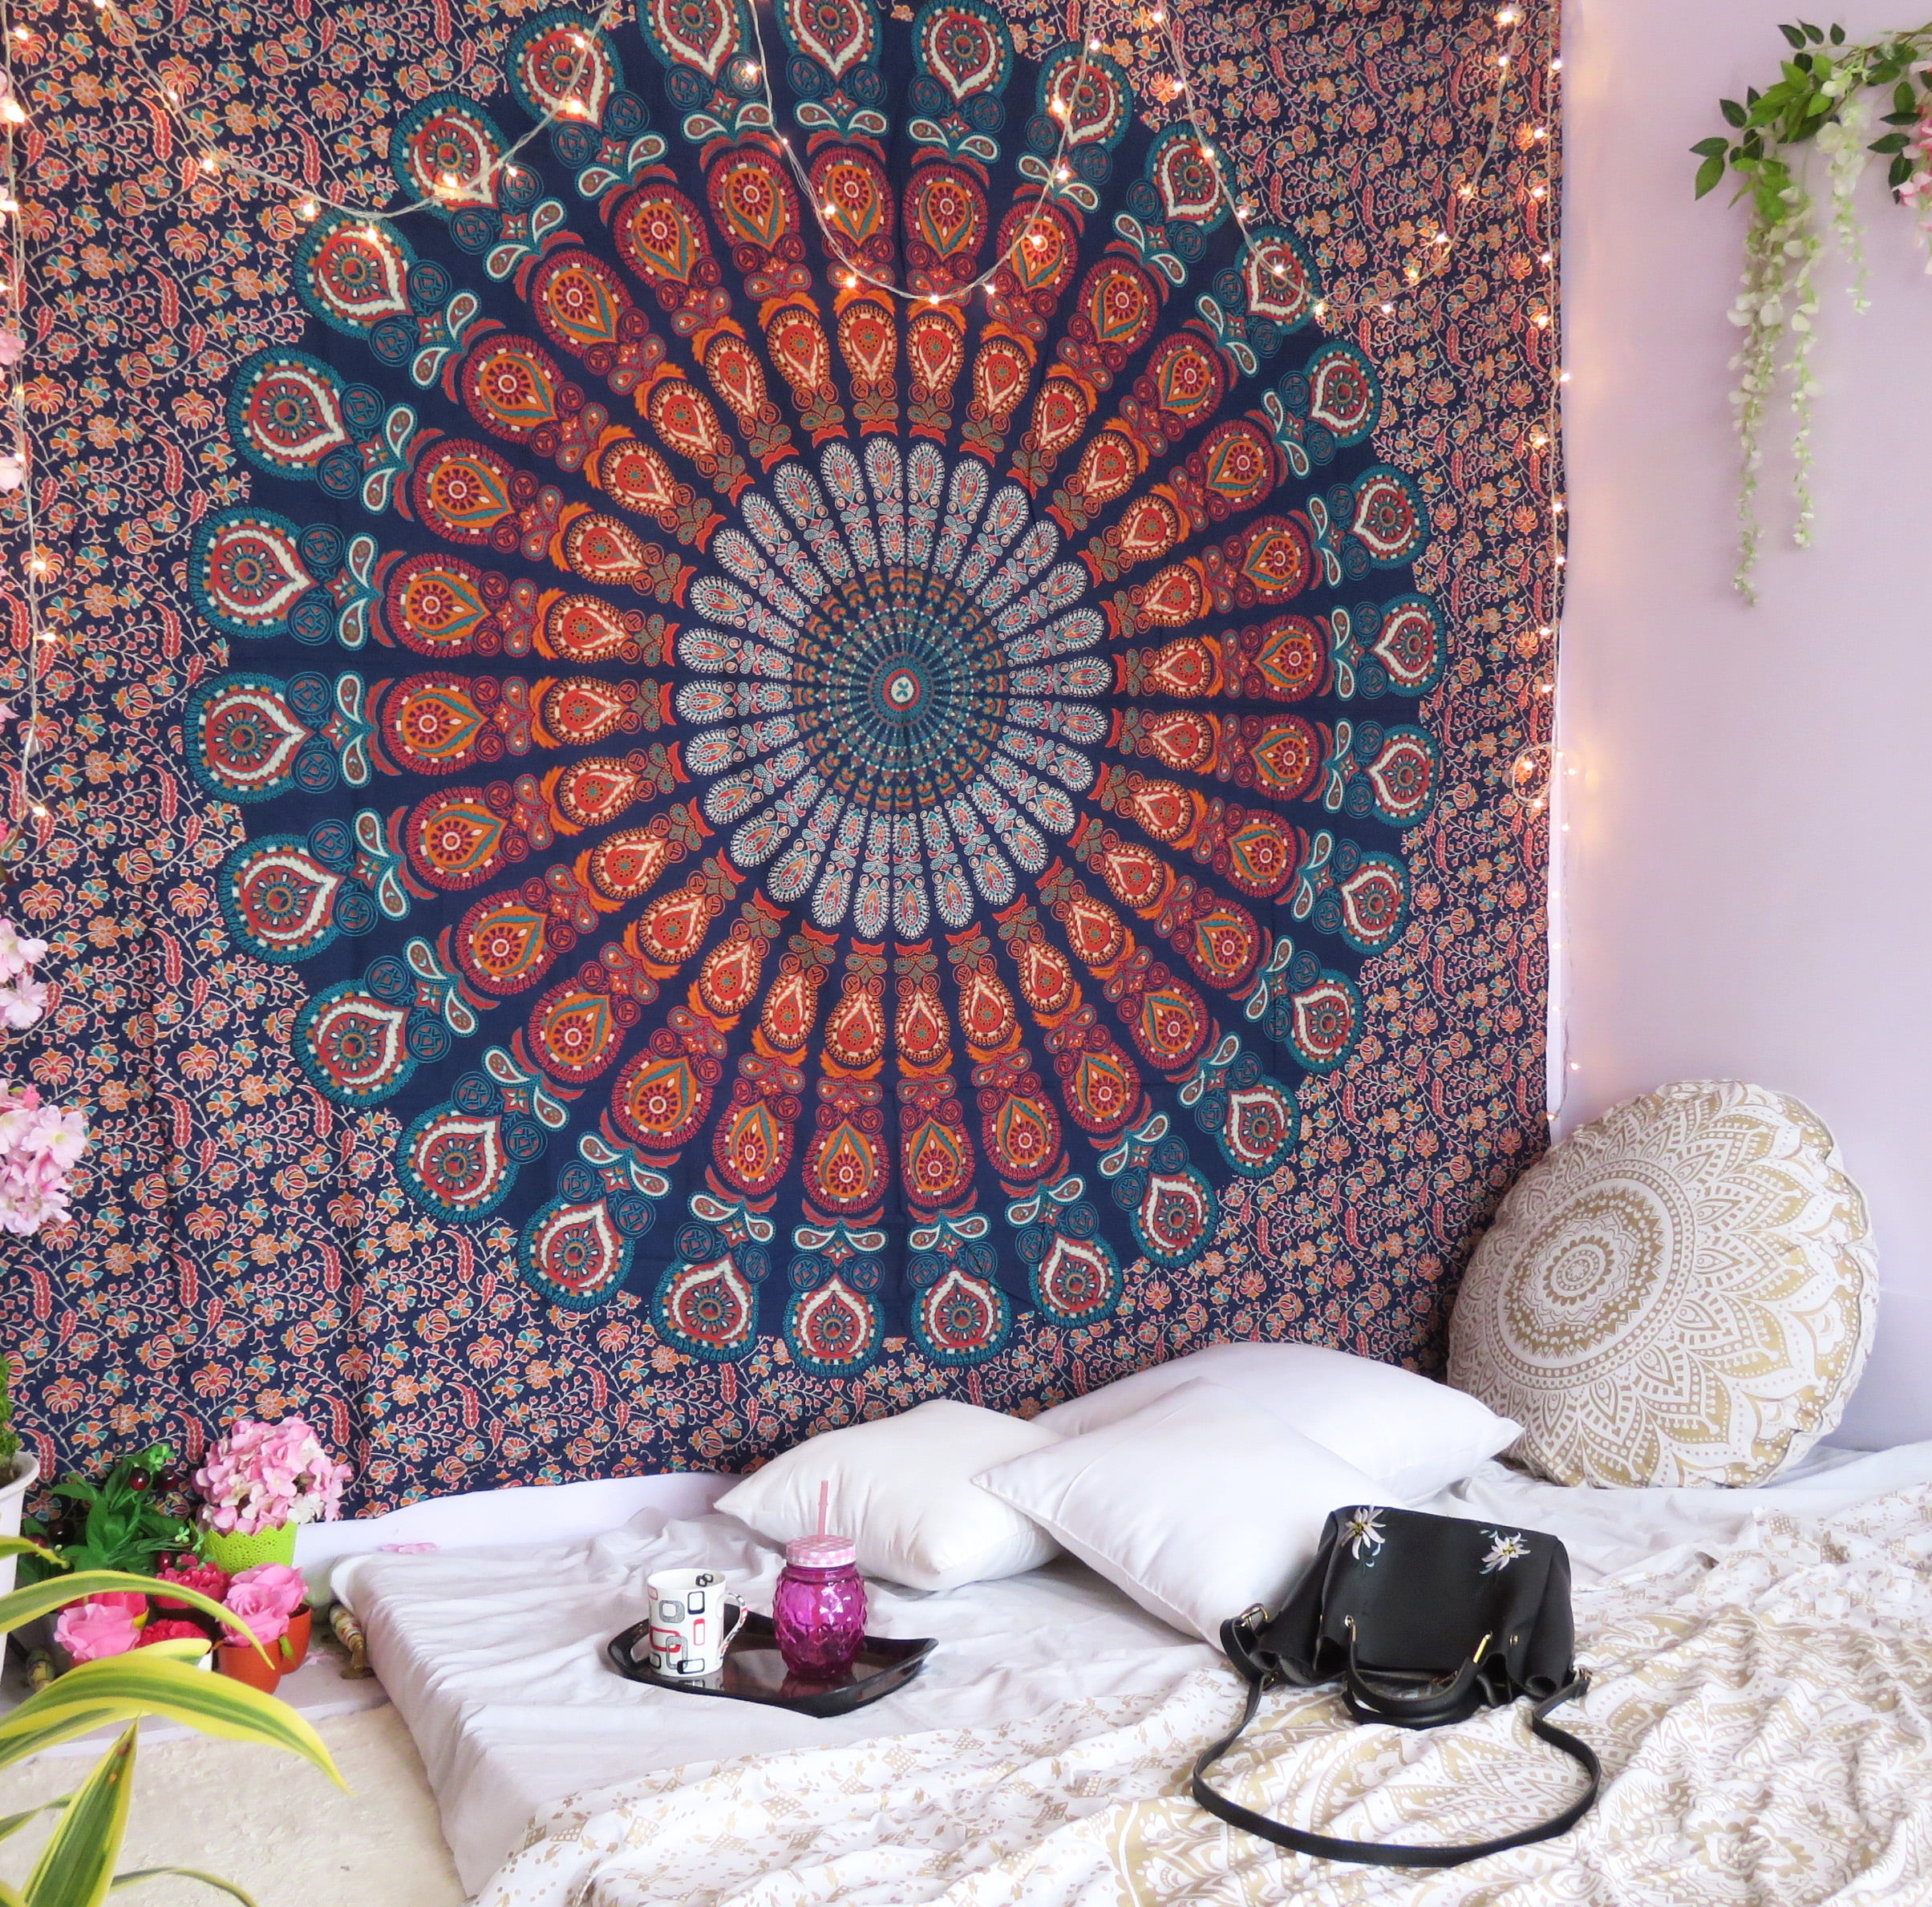 Queen Pink Tapestry Wall Hanging Ombre Wall Tapestry Indian Mandala Tapestry Bohemian Tapestry Hippie Tapestry Psychedelic Tapestry Wall Decor Large Boho Tapestries for Bedroom Dorm Decor